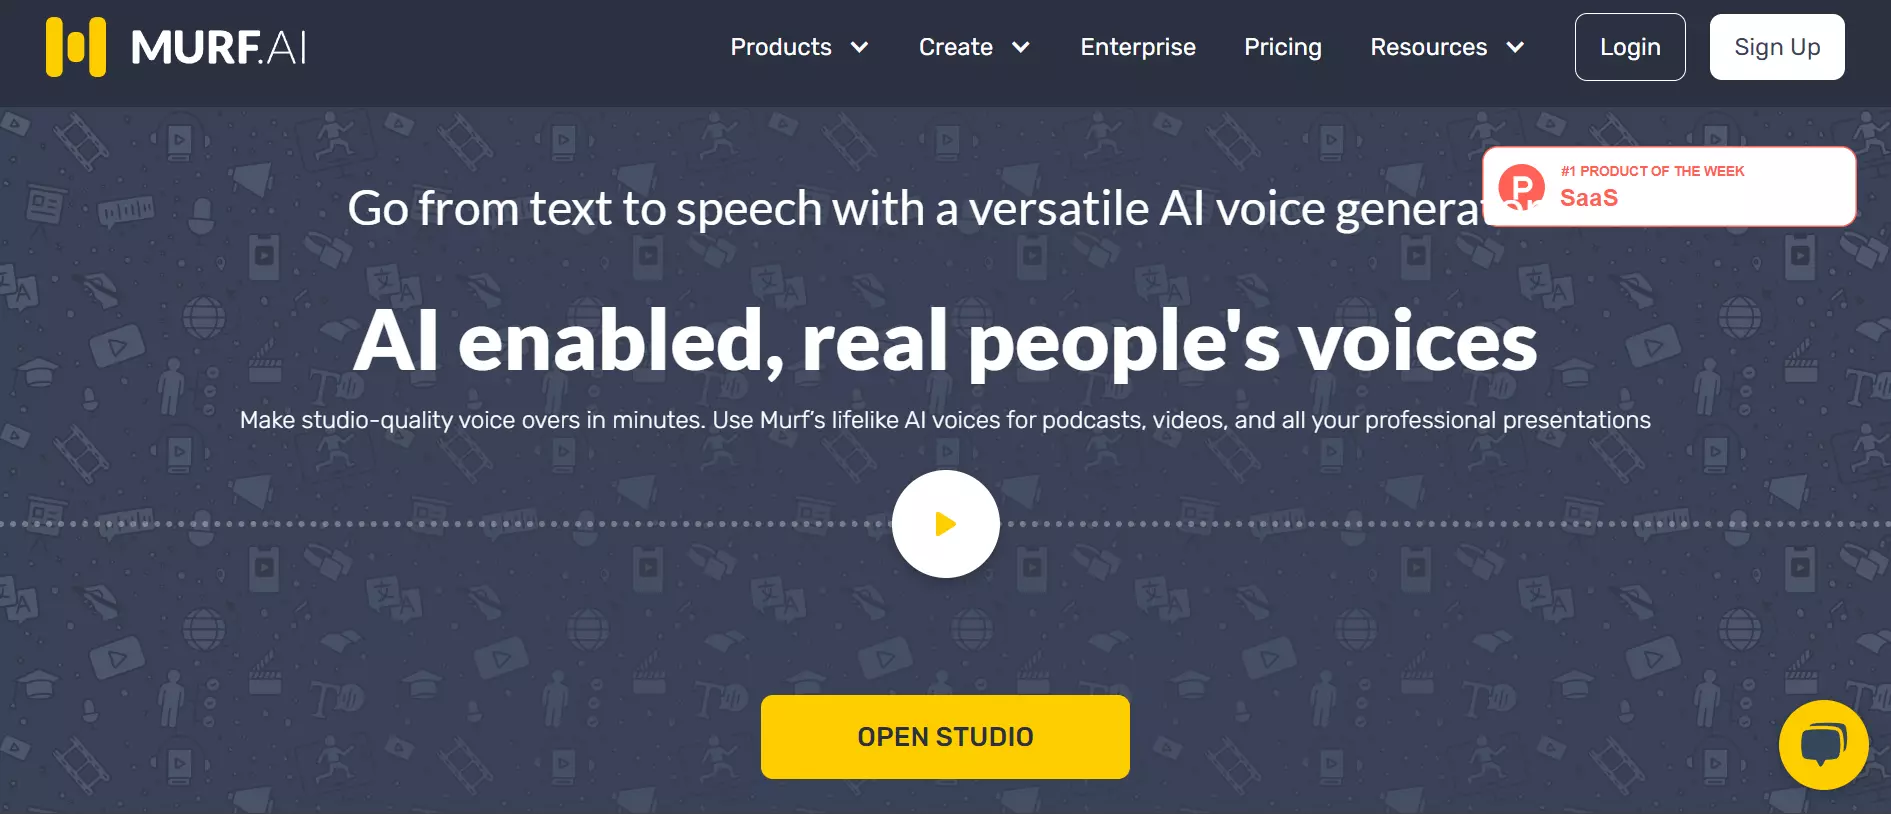 Murf AI tool used to convert text to voice with innovation